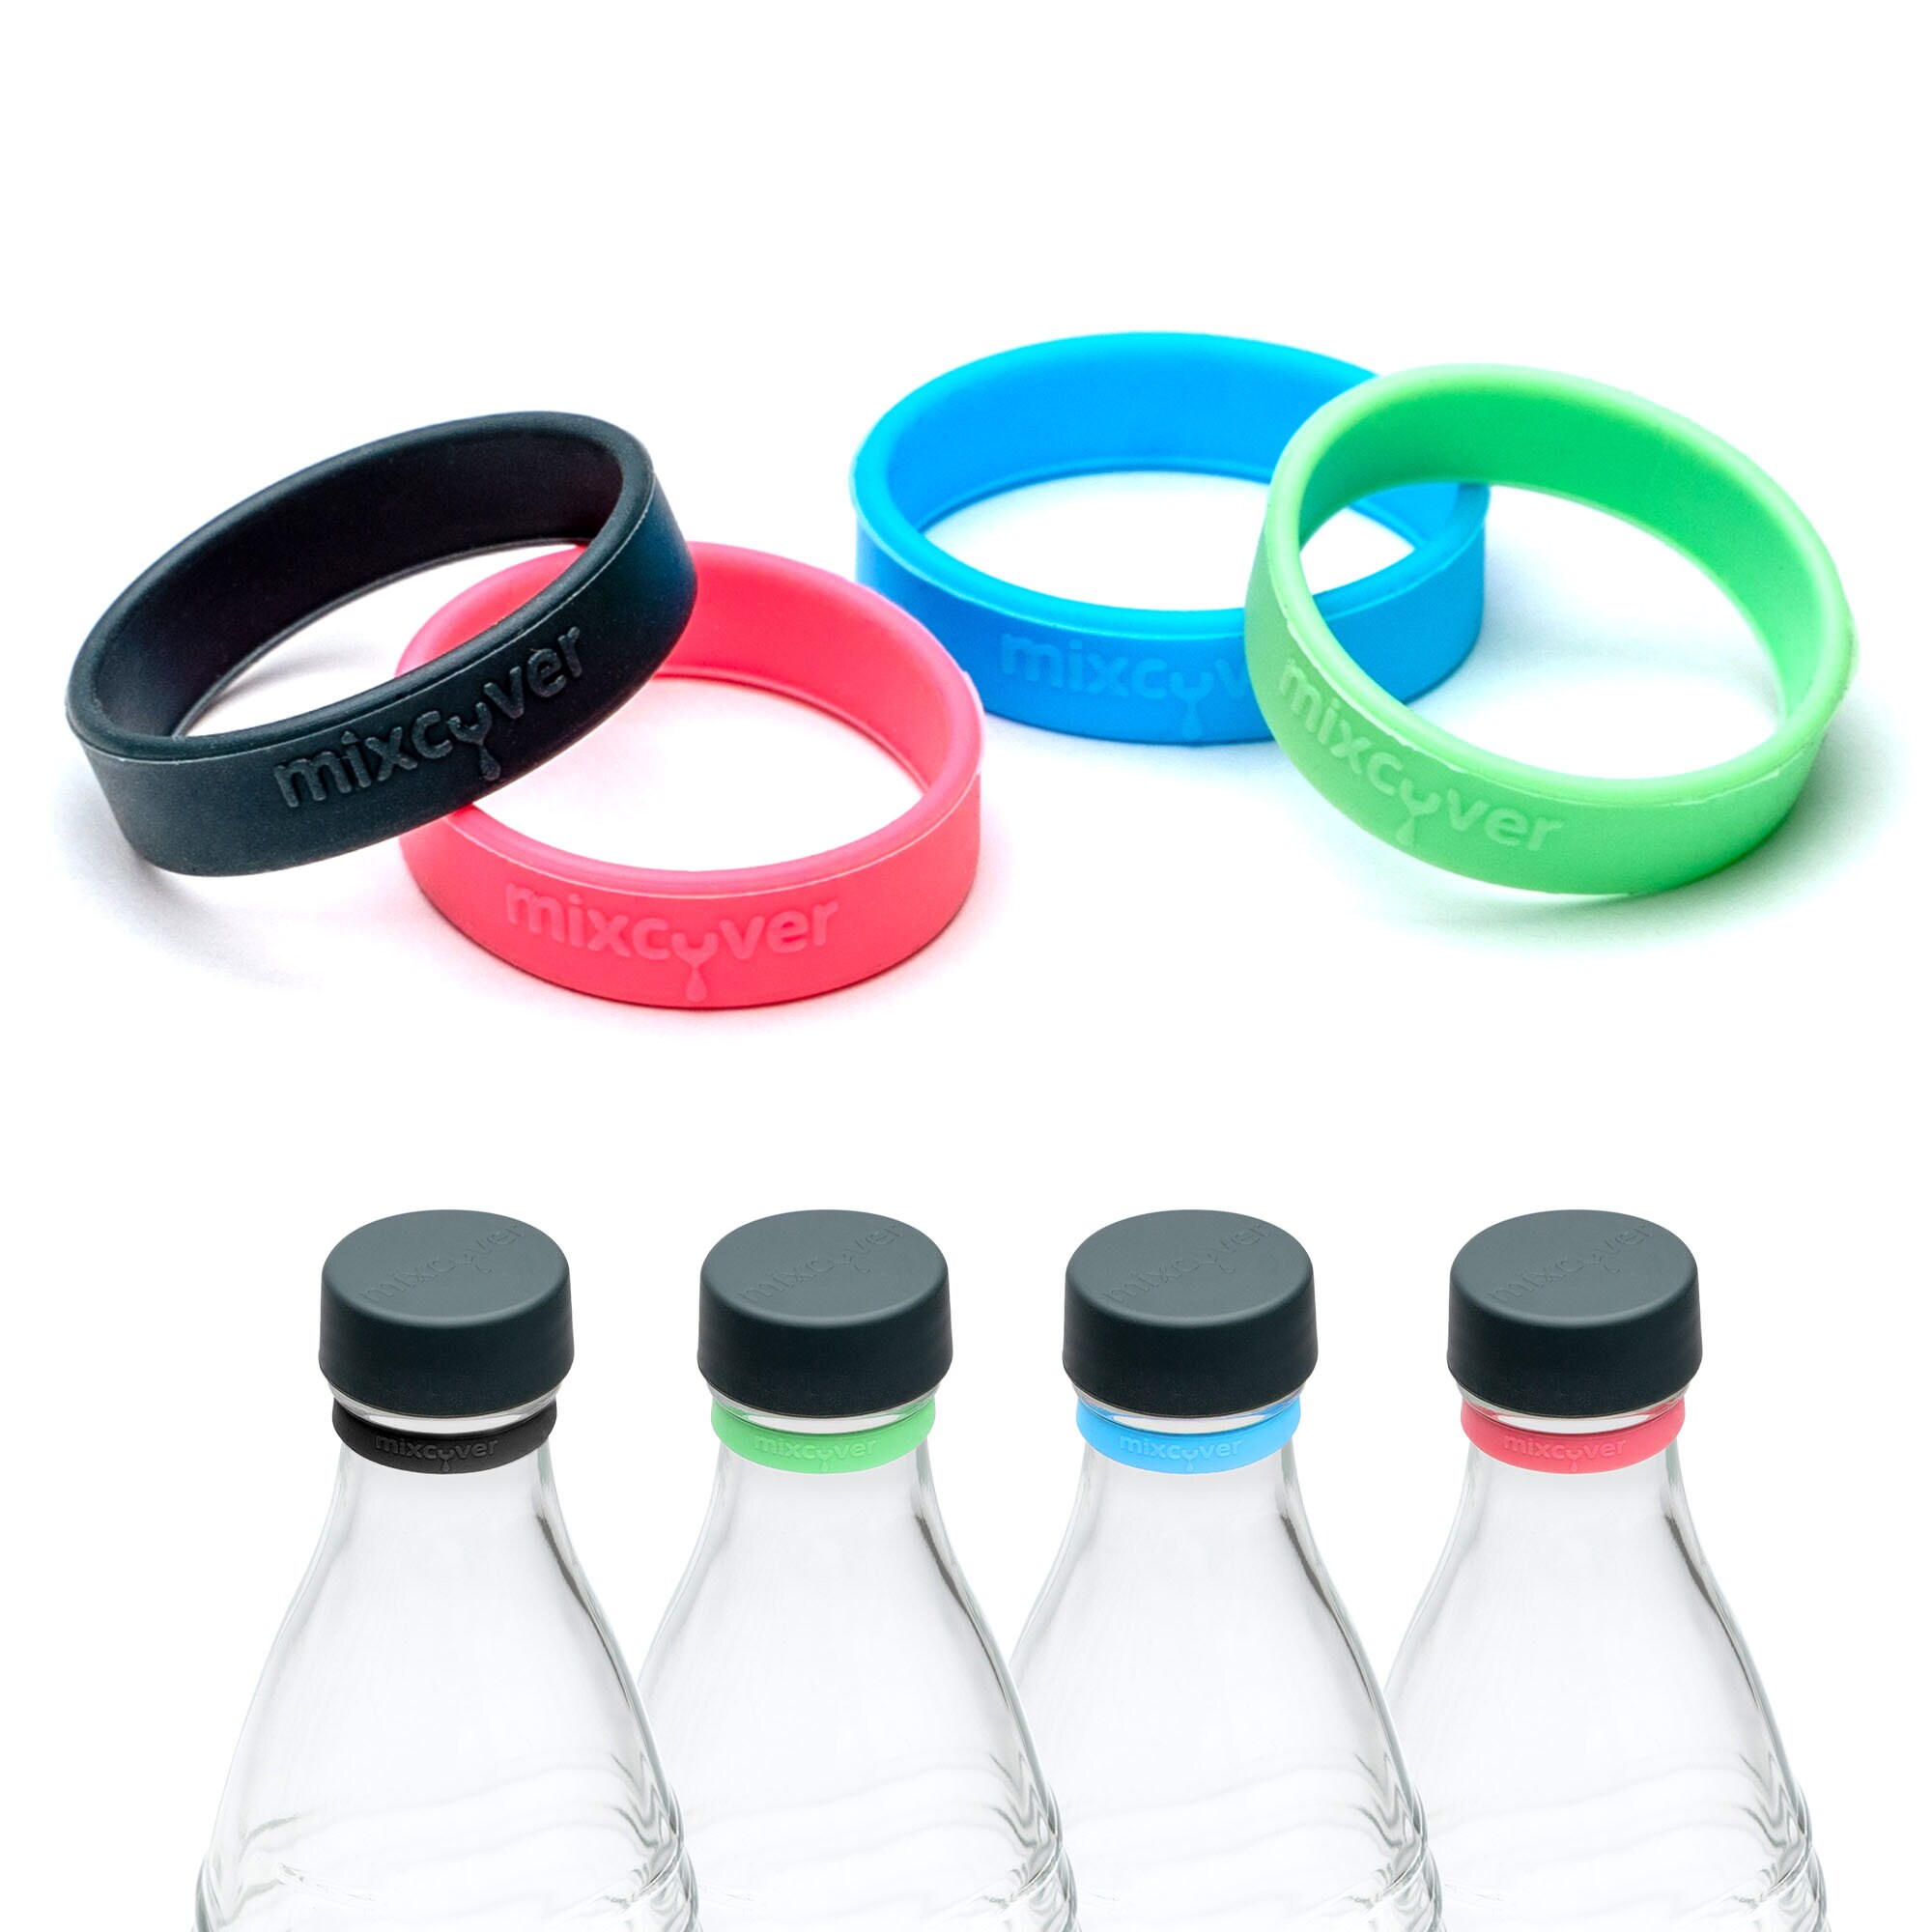 Mixcover Silicone Ring for Marking Drinking Bottles or Sodastream Bottles 